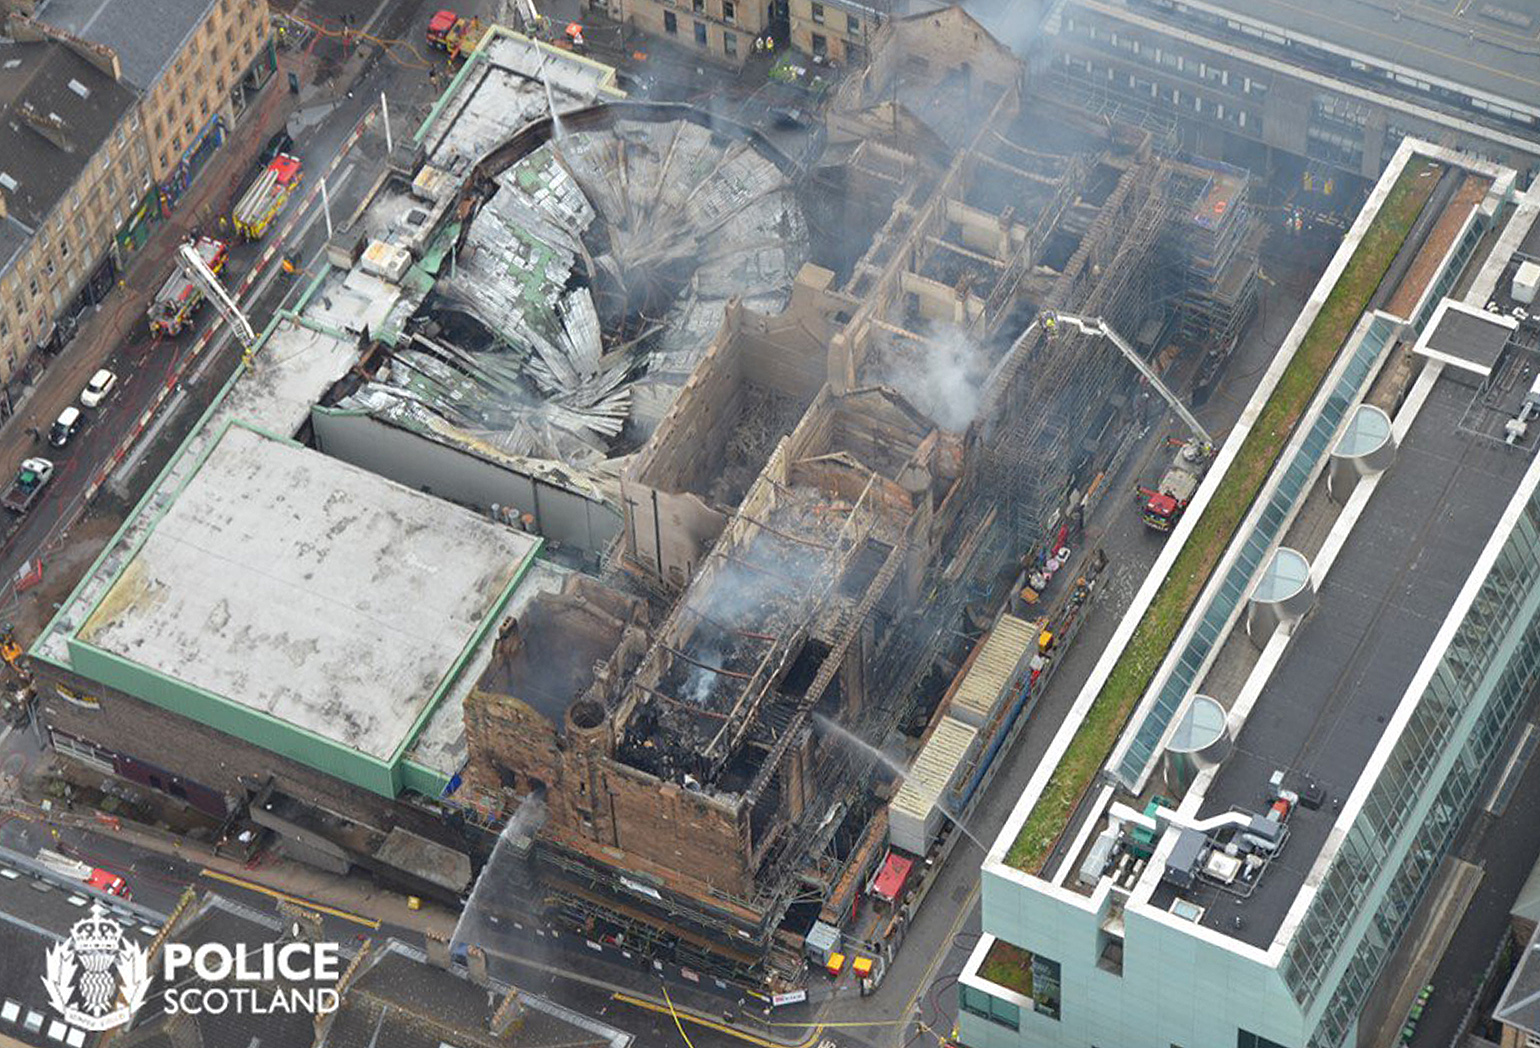 Aerial view of Glasgow School of Art and surrounding buildings after the fire on 15/16 June 2018